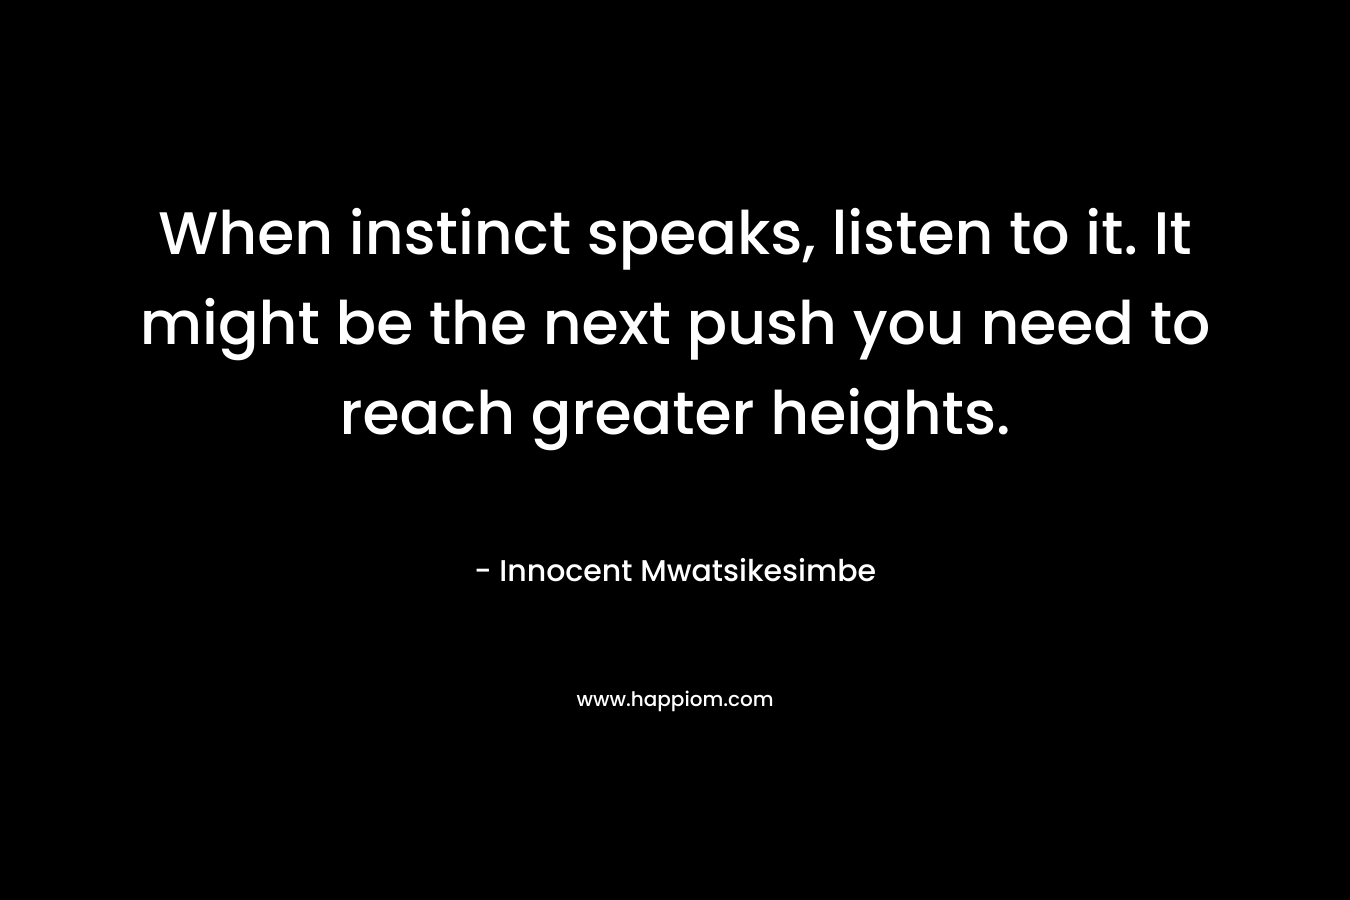 When instinct speaks, listen to it. It might be the next push you need to reach greater heights. – Innocent Mwatsikesimbe